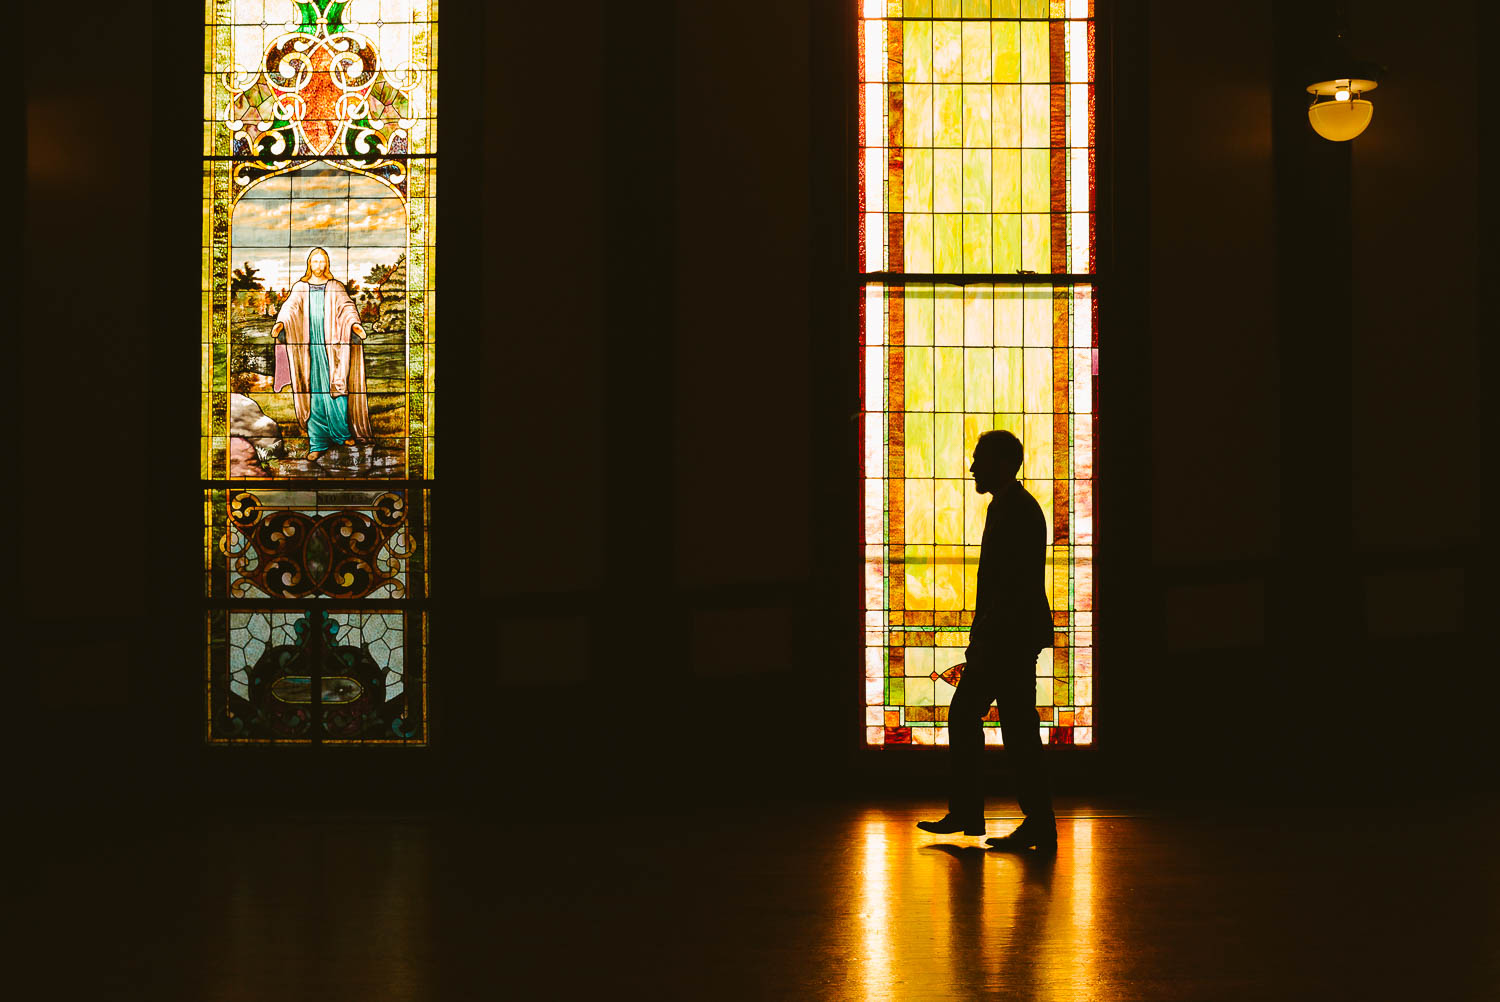 Groom moves past stained glass window as a silhouette at the-lyceum-wedding-leica-wedding-photographer-philip-thomas-022